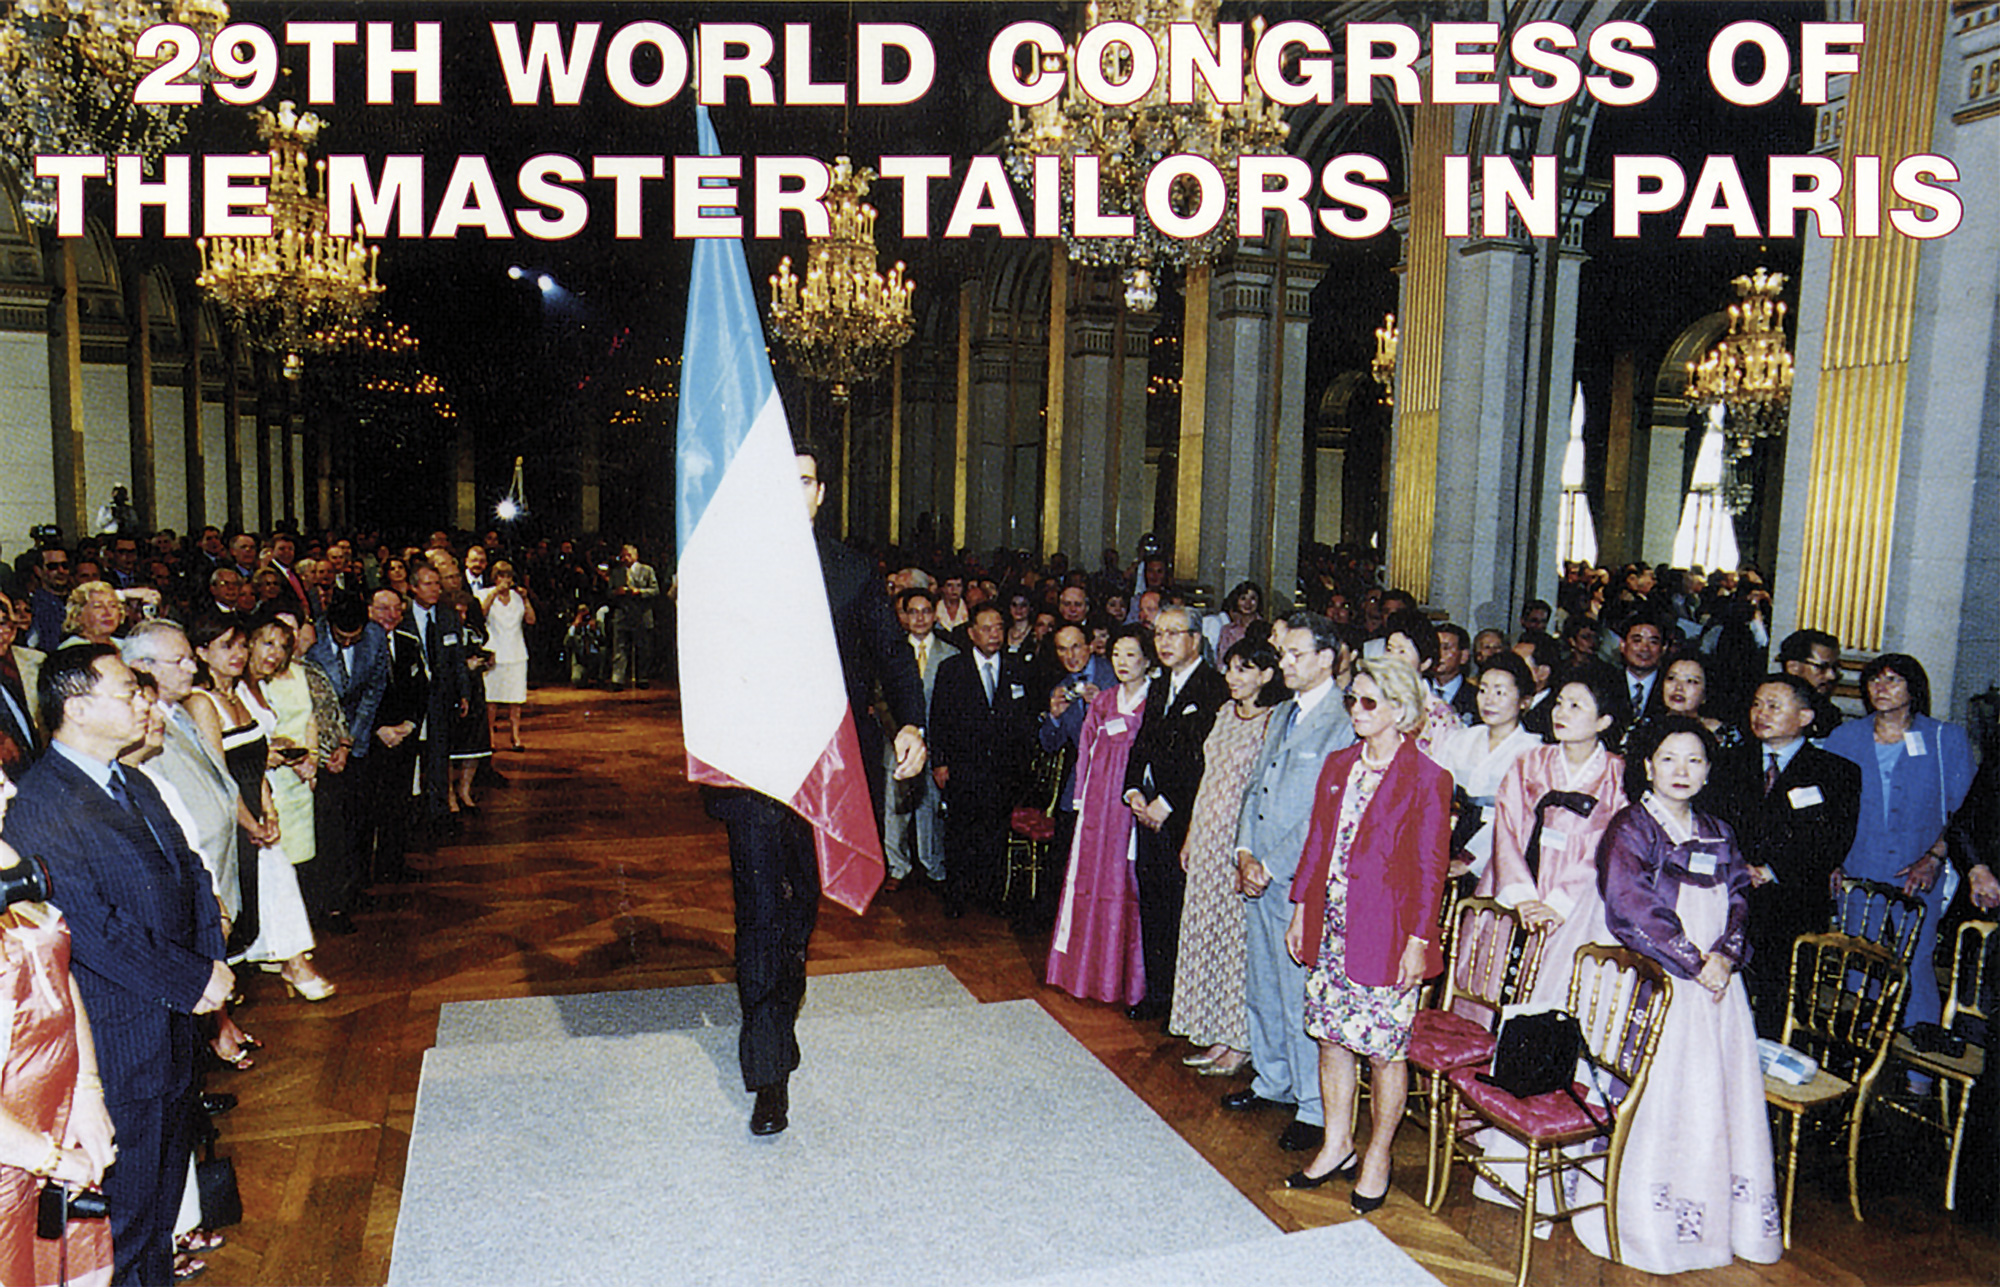 29th World Congress of Master Tailors